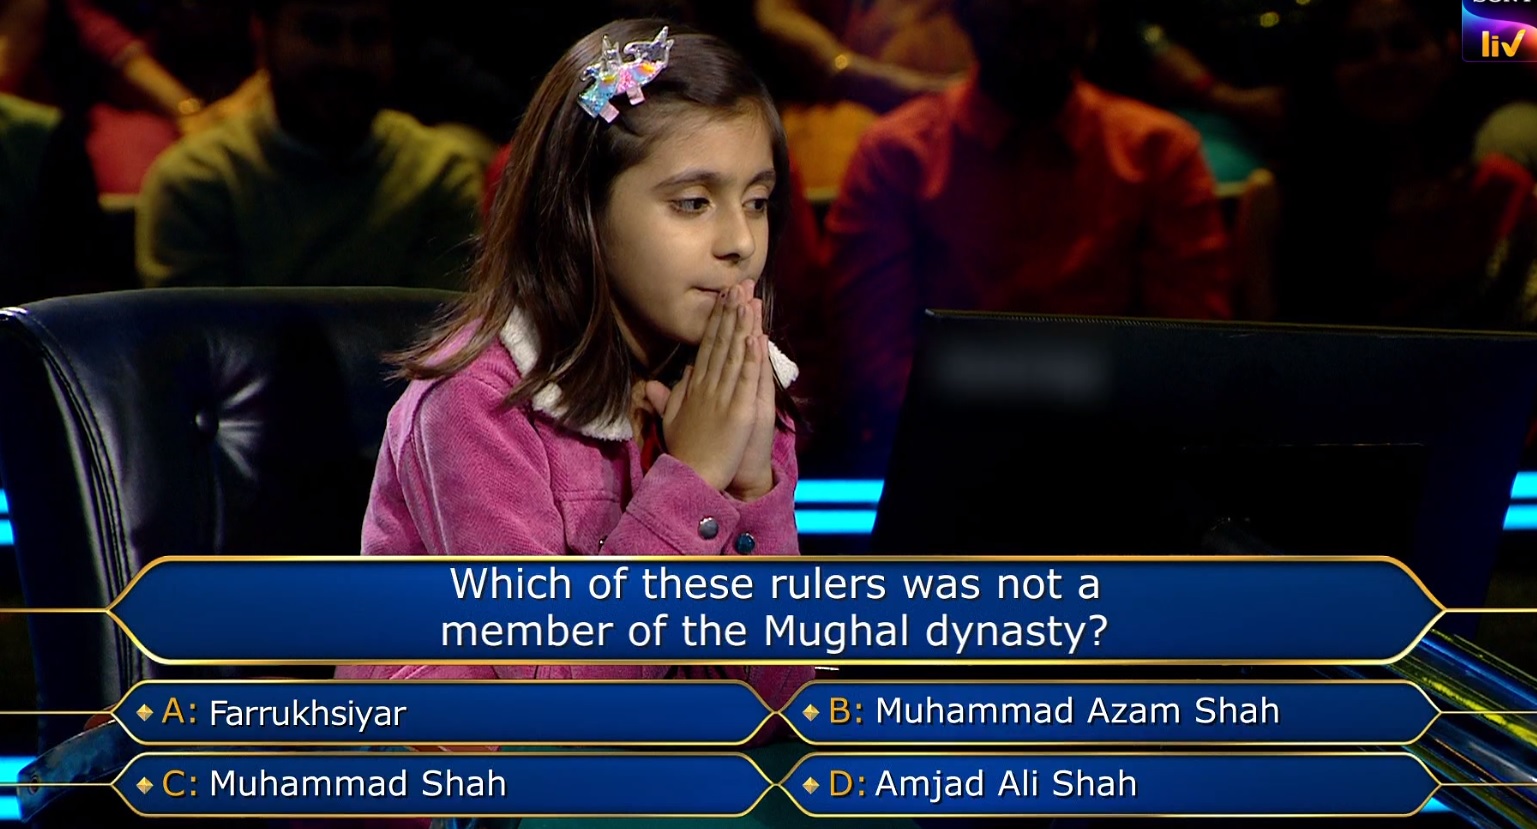 Ques : Which of these rulers was not a member of the Mughal dynasty?